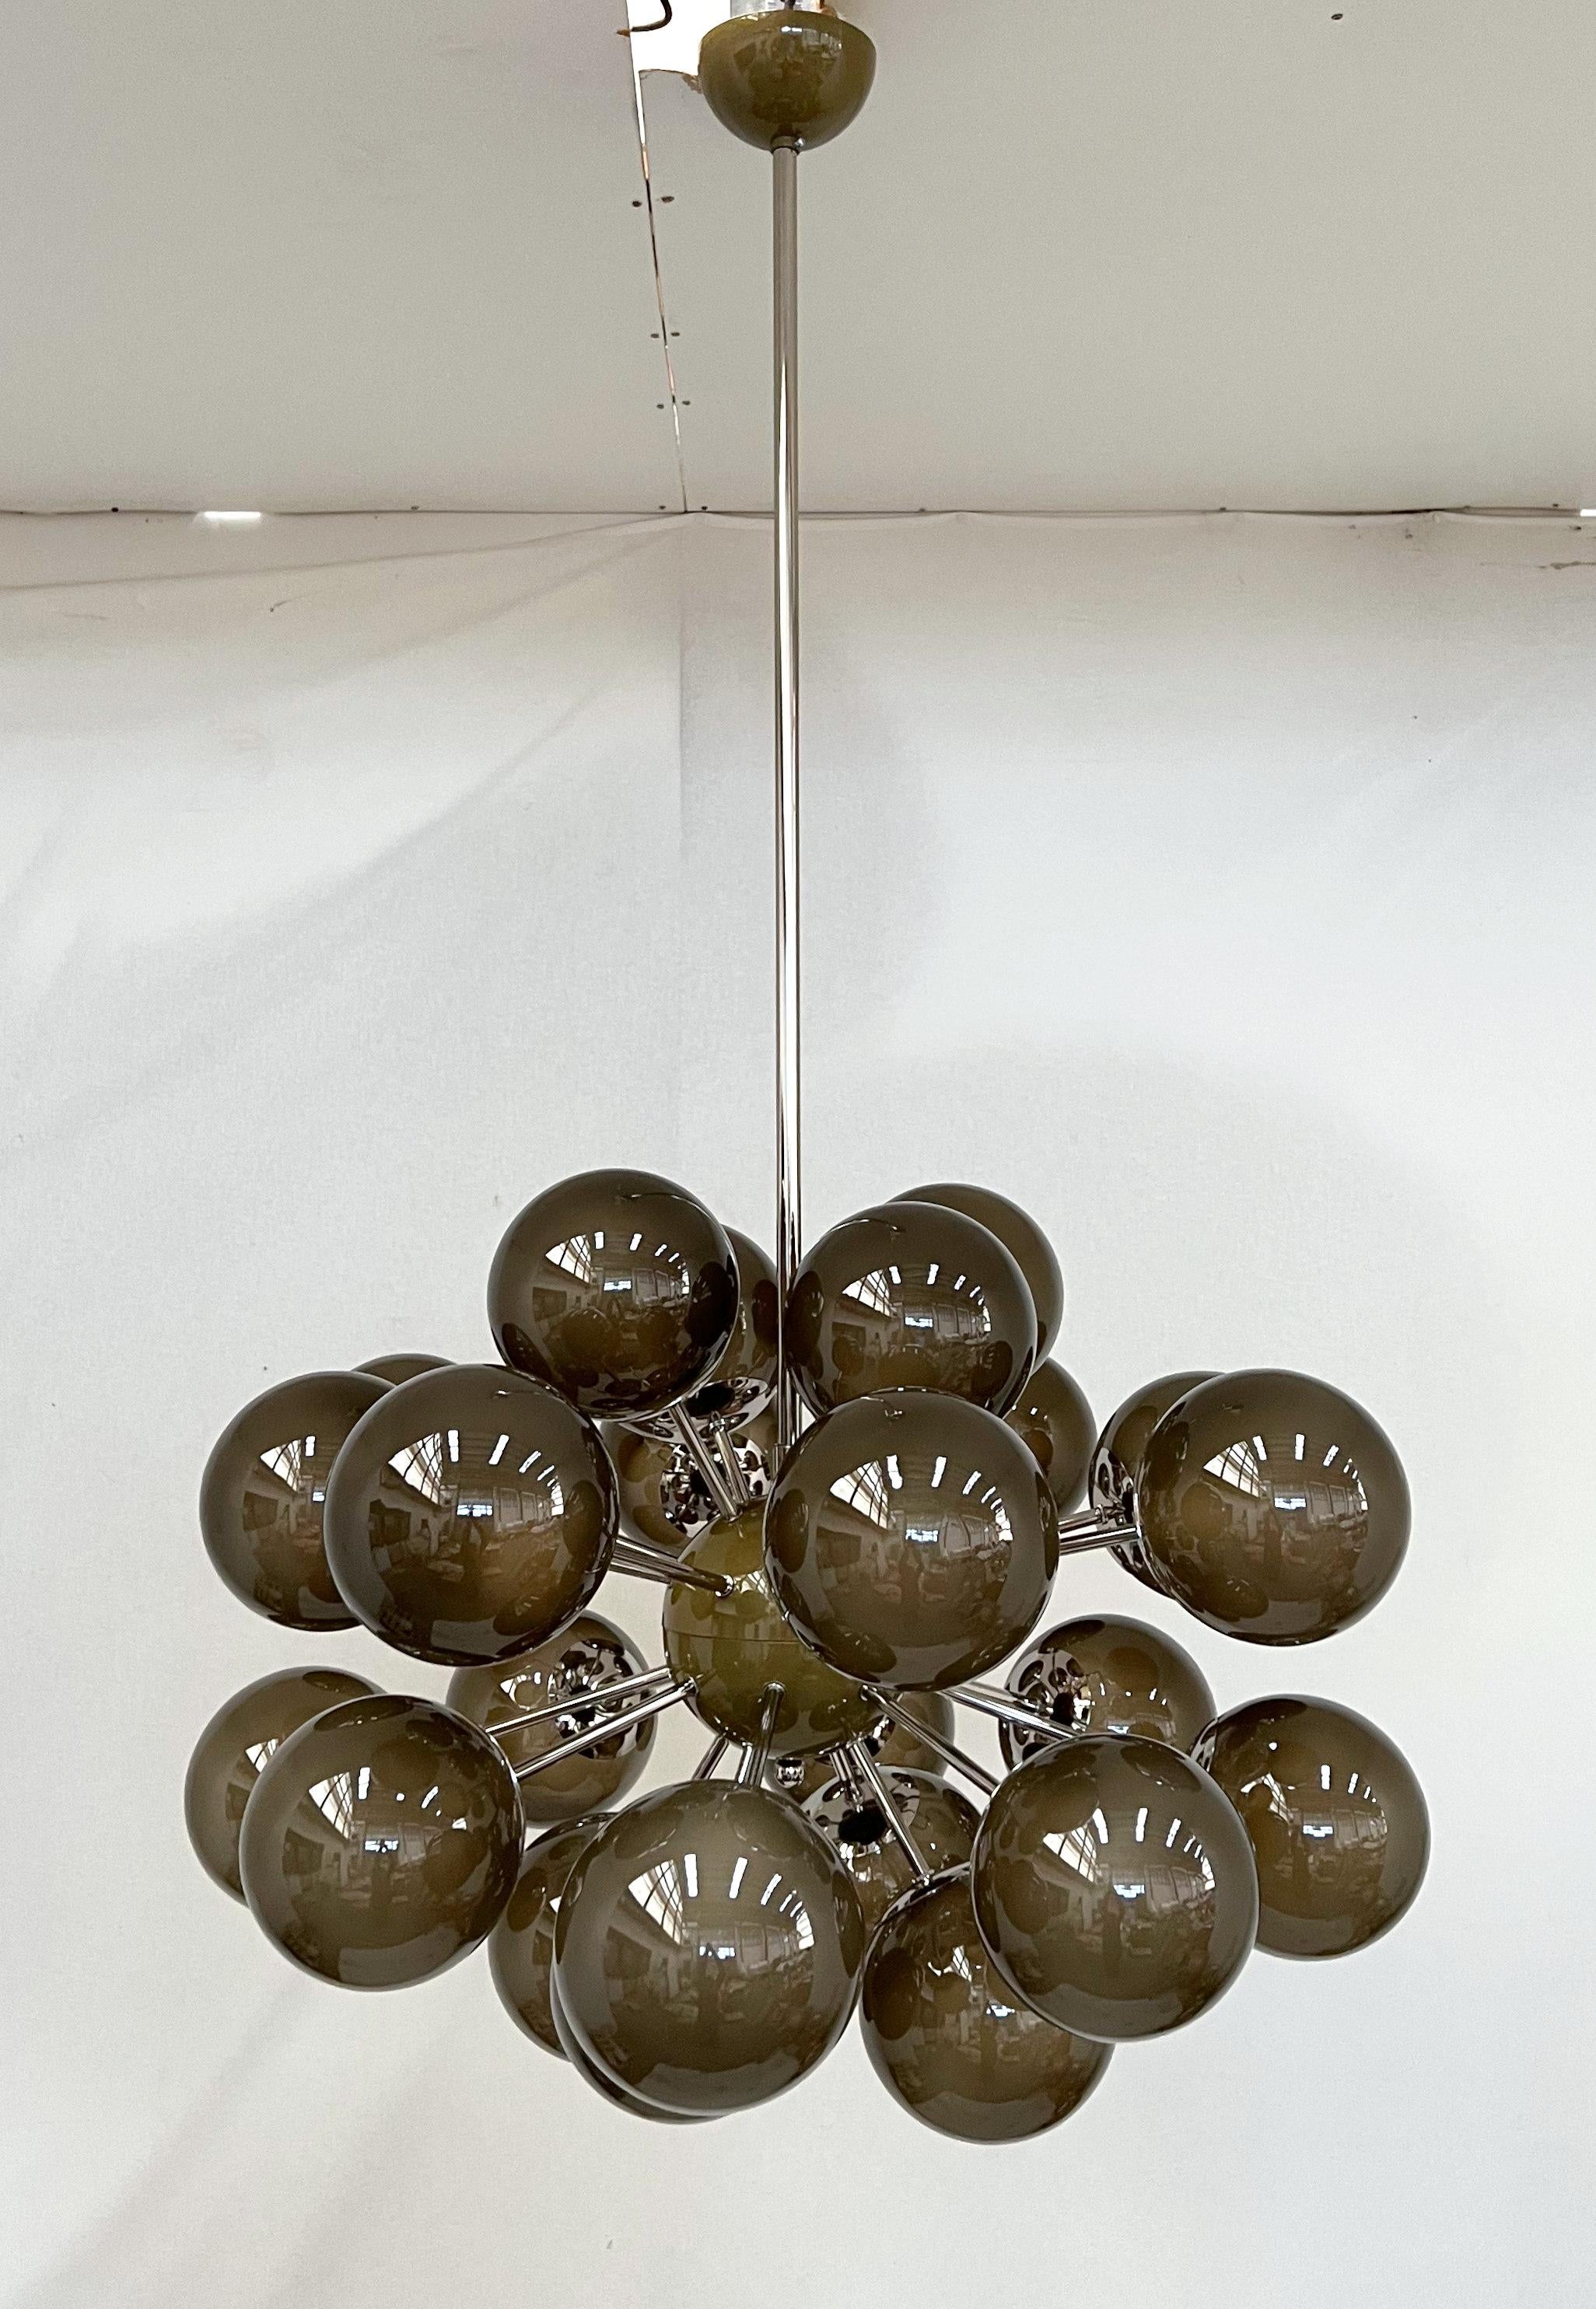 Italian oval shaped Sputnik chandelier with Murano glass globes mounted on metal frame in polished nickel finish / Designed by Fabio Bergomi for Fabio Ltd / Made in Italy
24 lights / E12 or E14 type / max 40W each
Diameter: 36 inches / Total